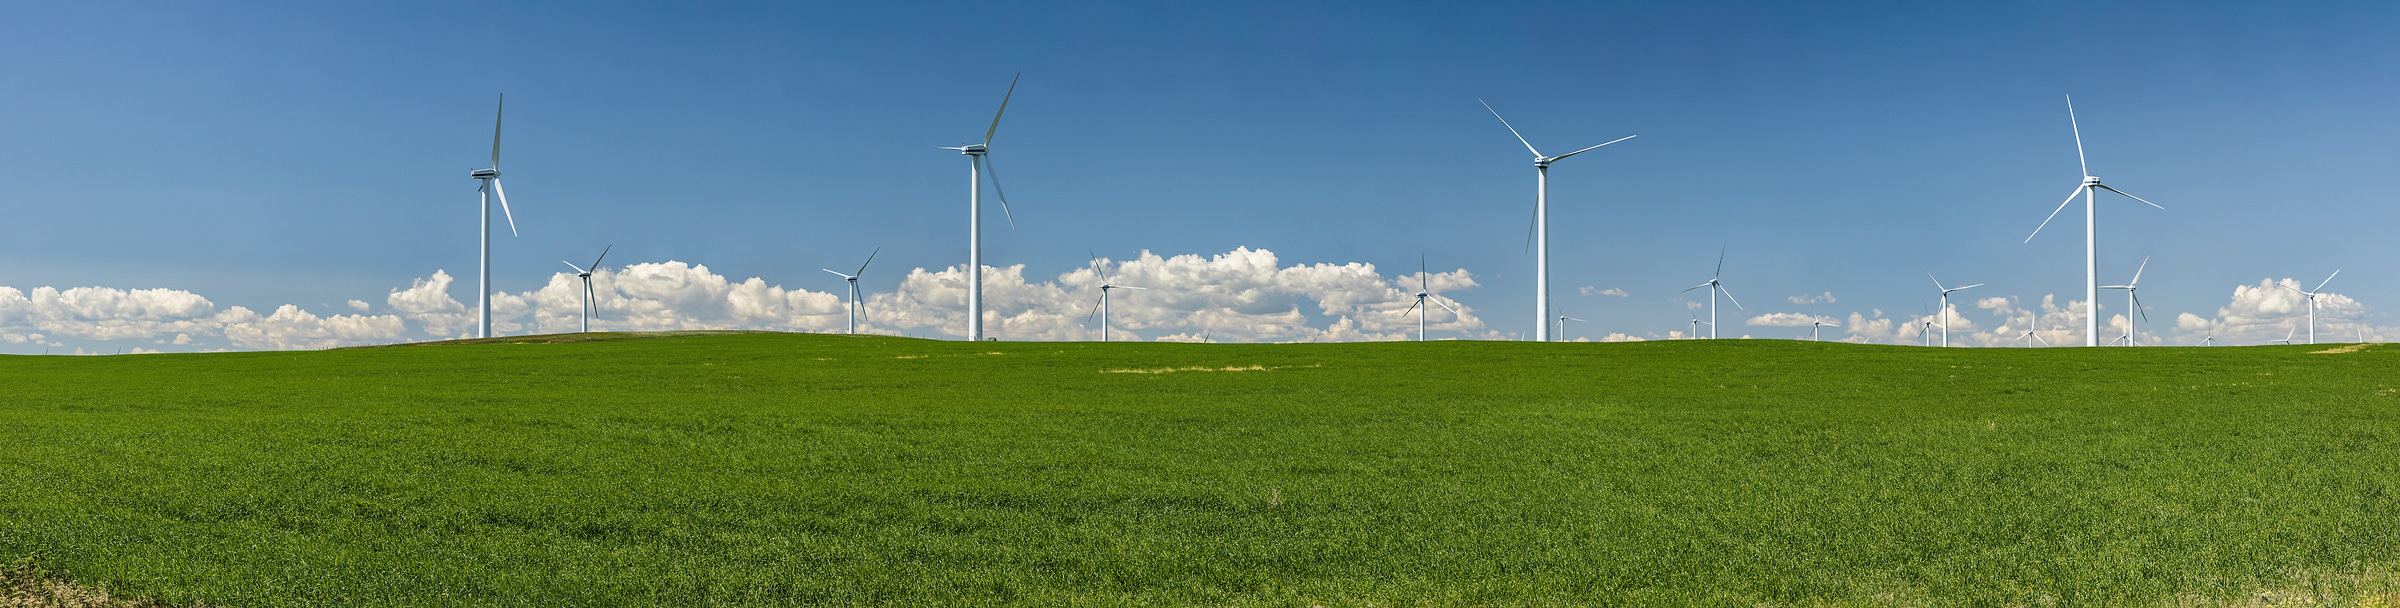 704 megapixels! A very high resolution, large-format VAST photo of wind turbines on a grassy hill with a blue sky; green energy photograph created by Scott Dimond in Fort Macleod, Alberta, Canada.